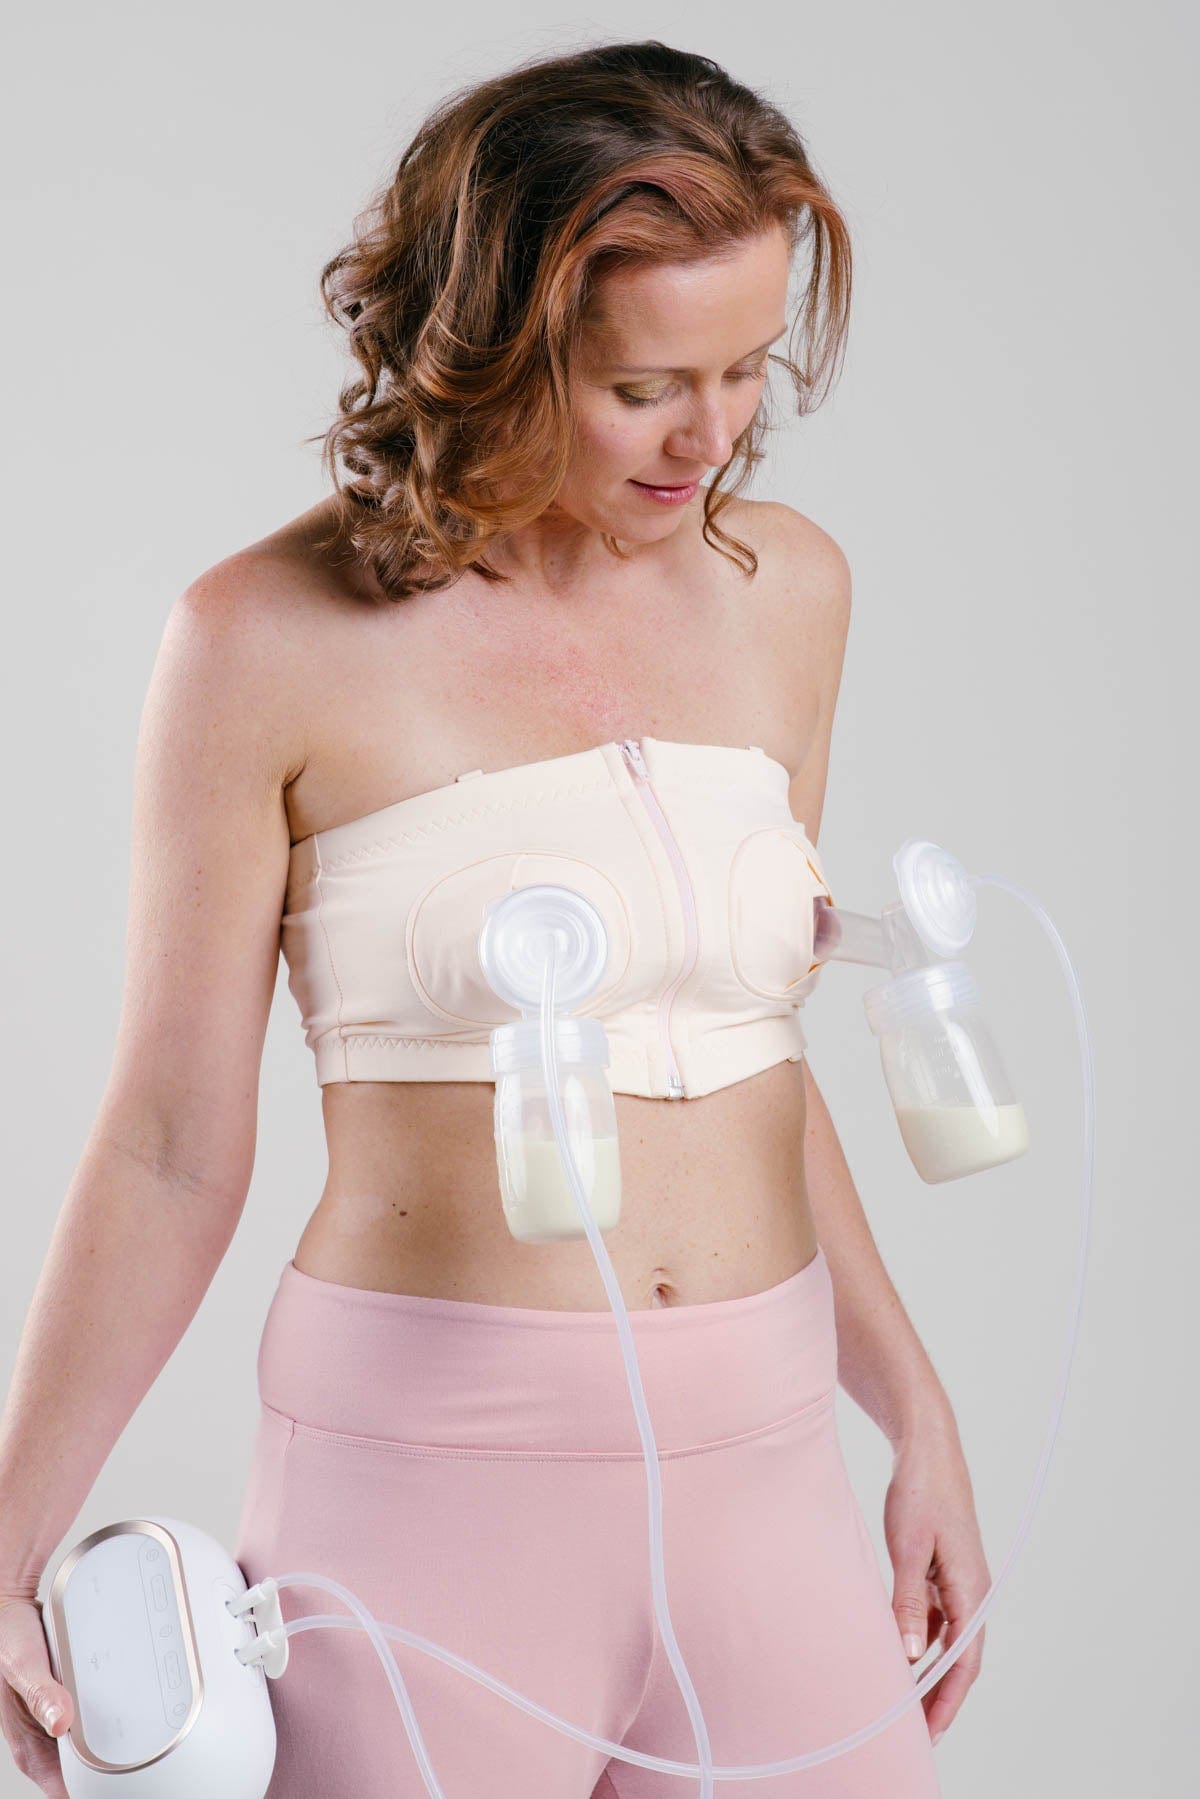 Hands Free Pumping Bra, Adjustable Breast-pumps Holding And